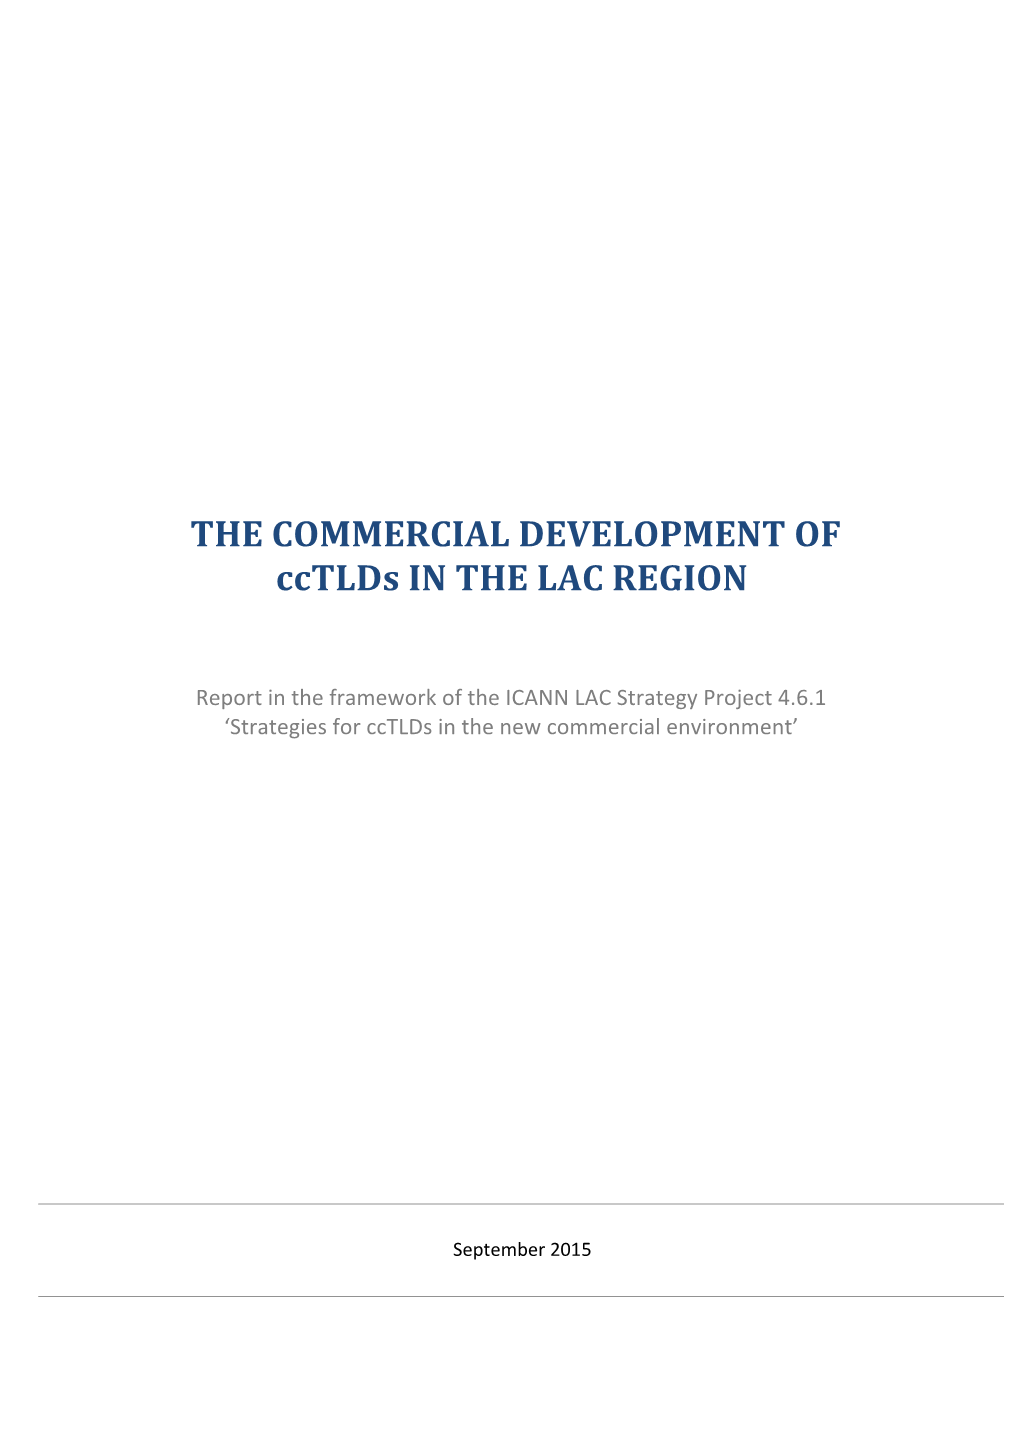 THE COMMERCIAL DEVELOPMENT of Cctlds in the LAC REGION